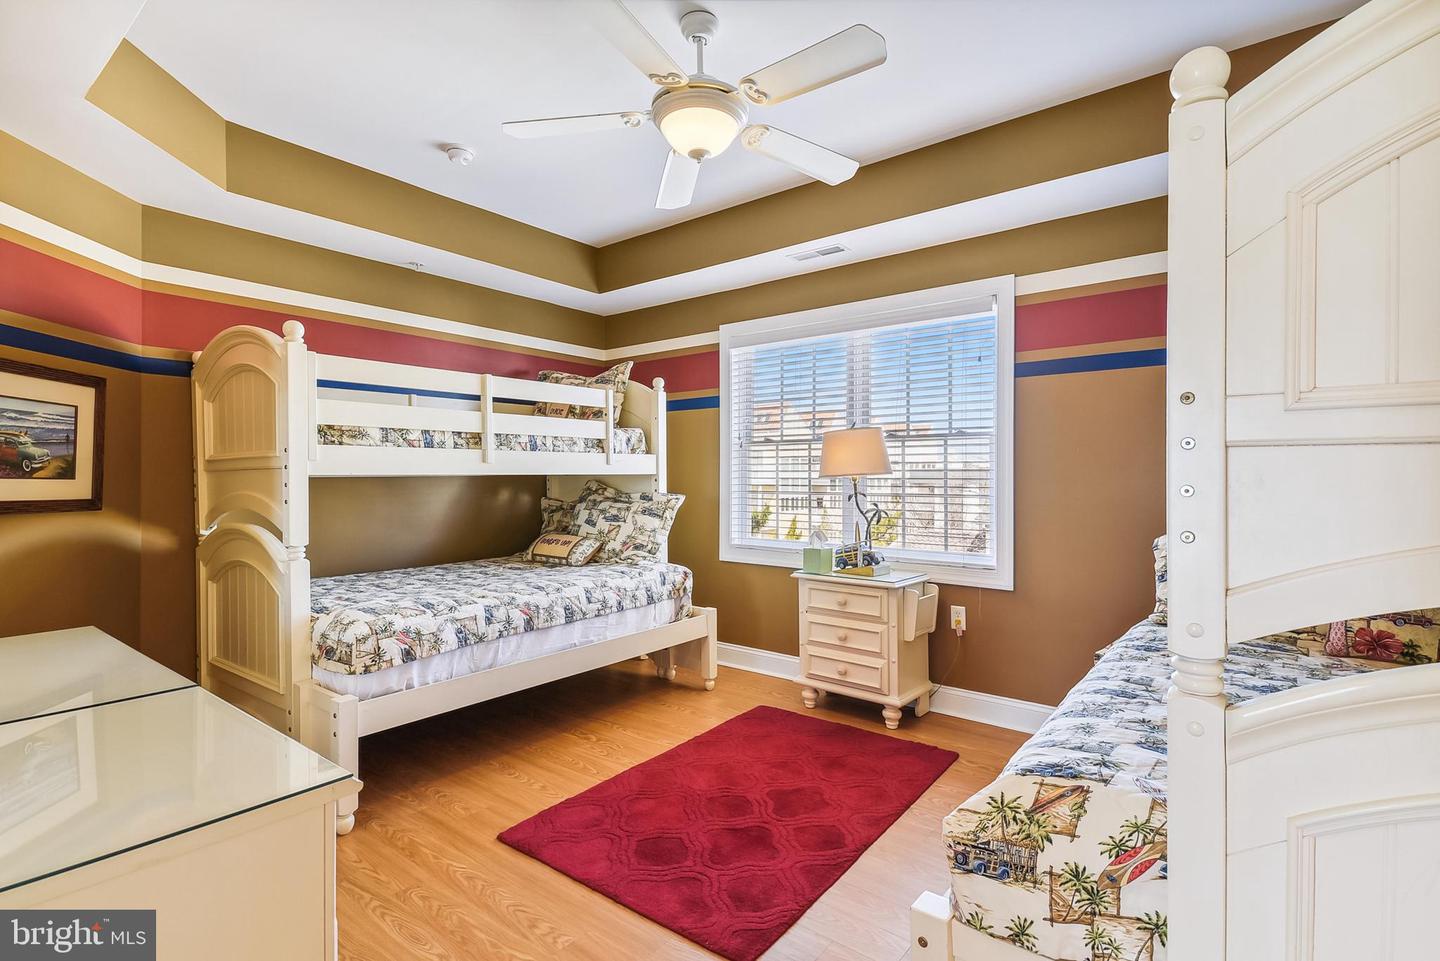 MDWO2019340-802917093634-2024-03-12-11-41-08 14301 Wight St #201 | Ocean City, MD Real Estate For Sale | MLS# Mdwo2019340  - 1st Choice Properties